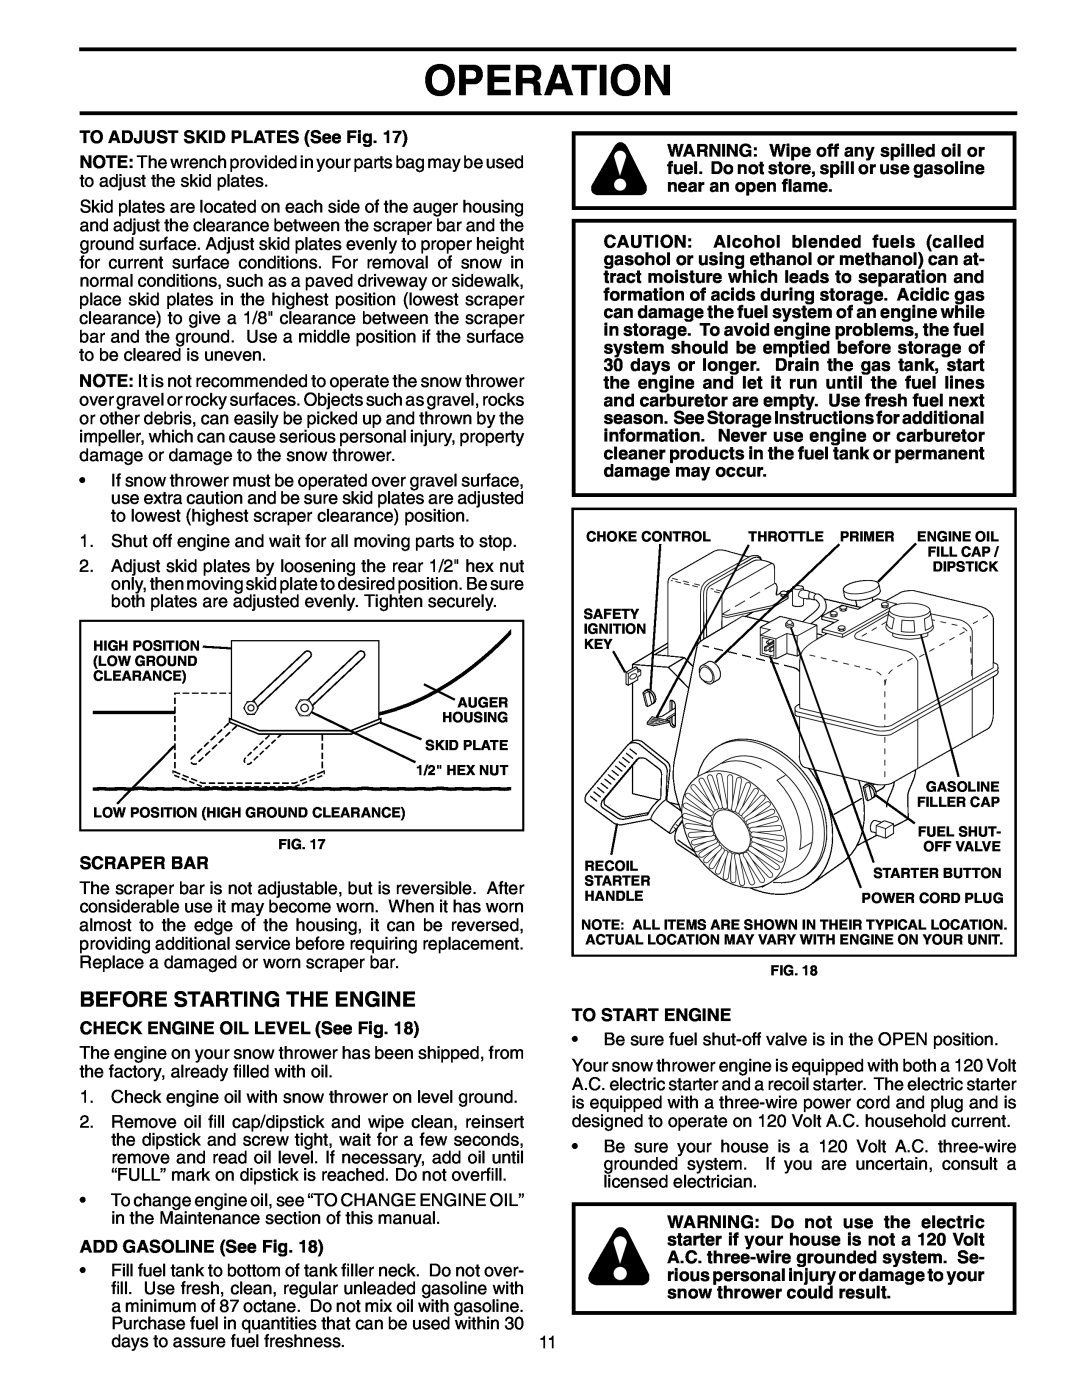 Poulan 199375 Before Starting The Engine, Operation, TO ADJUST SKID PLATES See Fig, Scraper Bar, ADD GASOLINE See Fig 